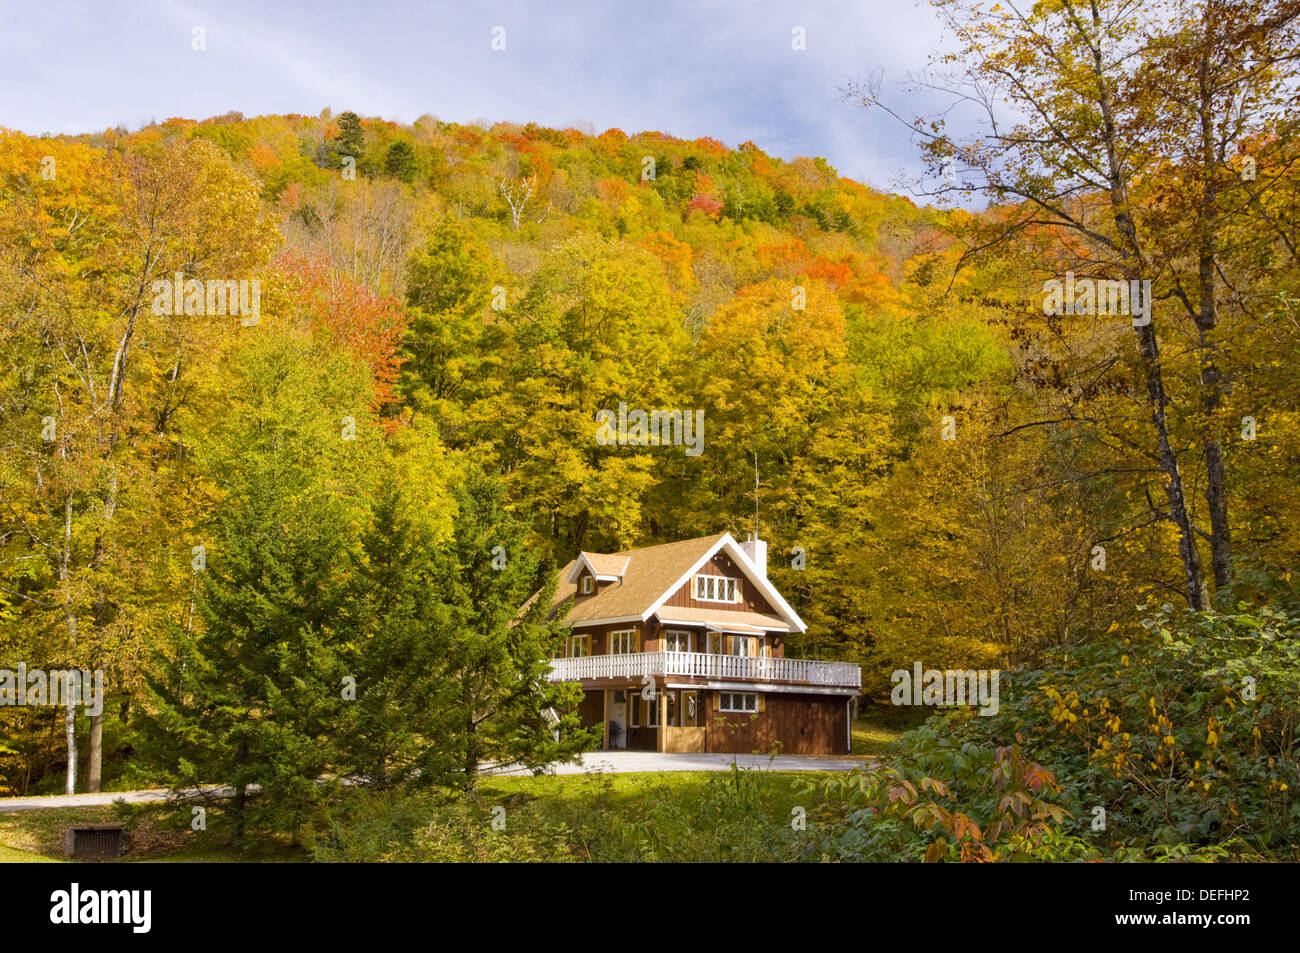 The hillsides of rural Vermont ablaze with fall foliage color Stock Photo